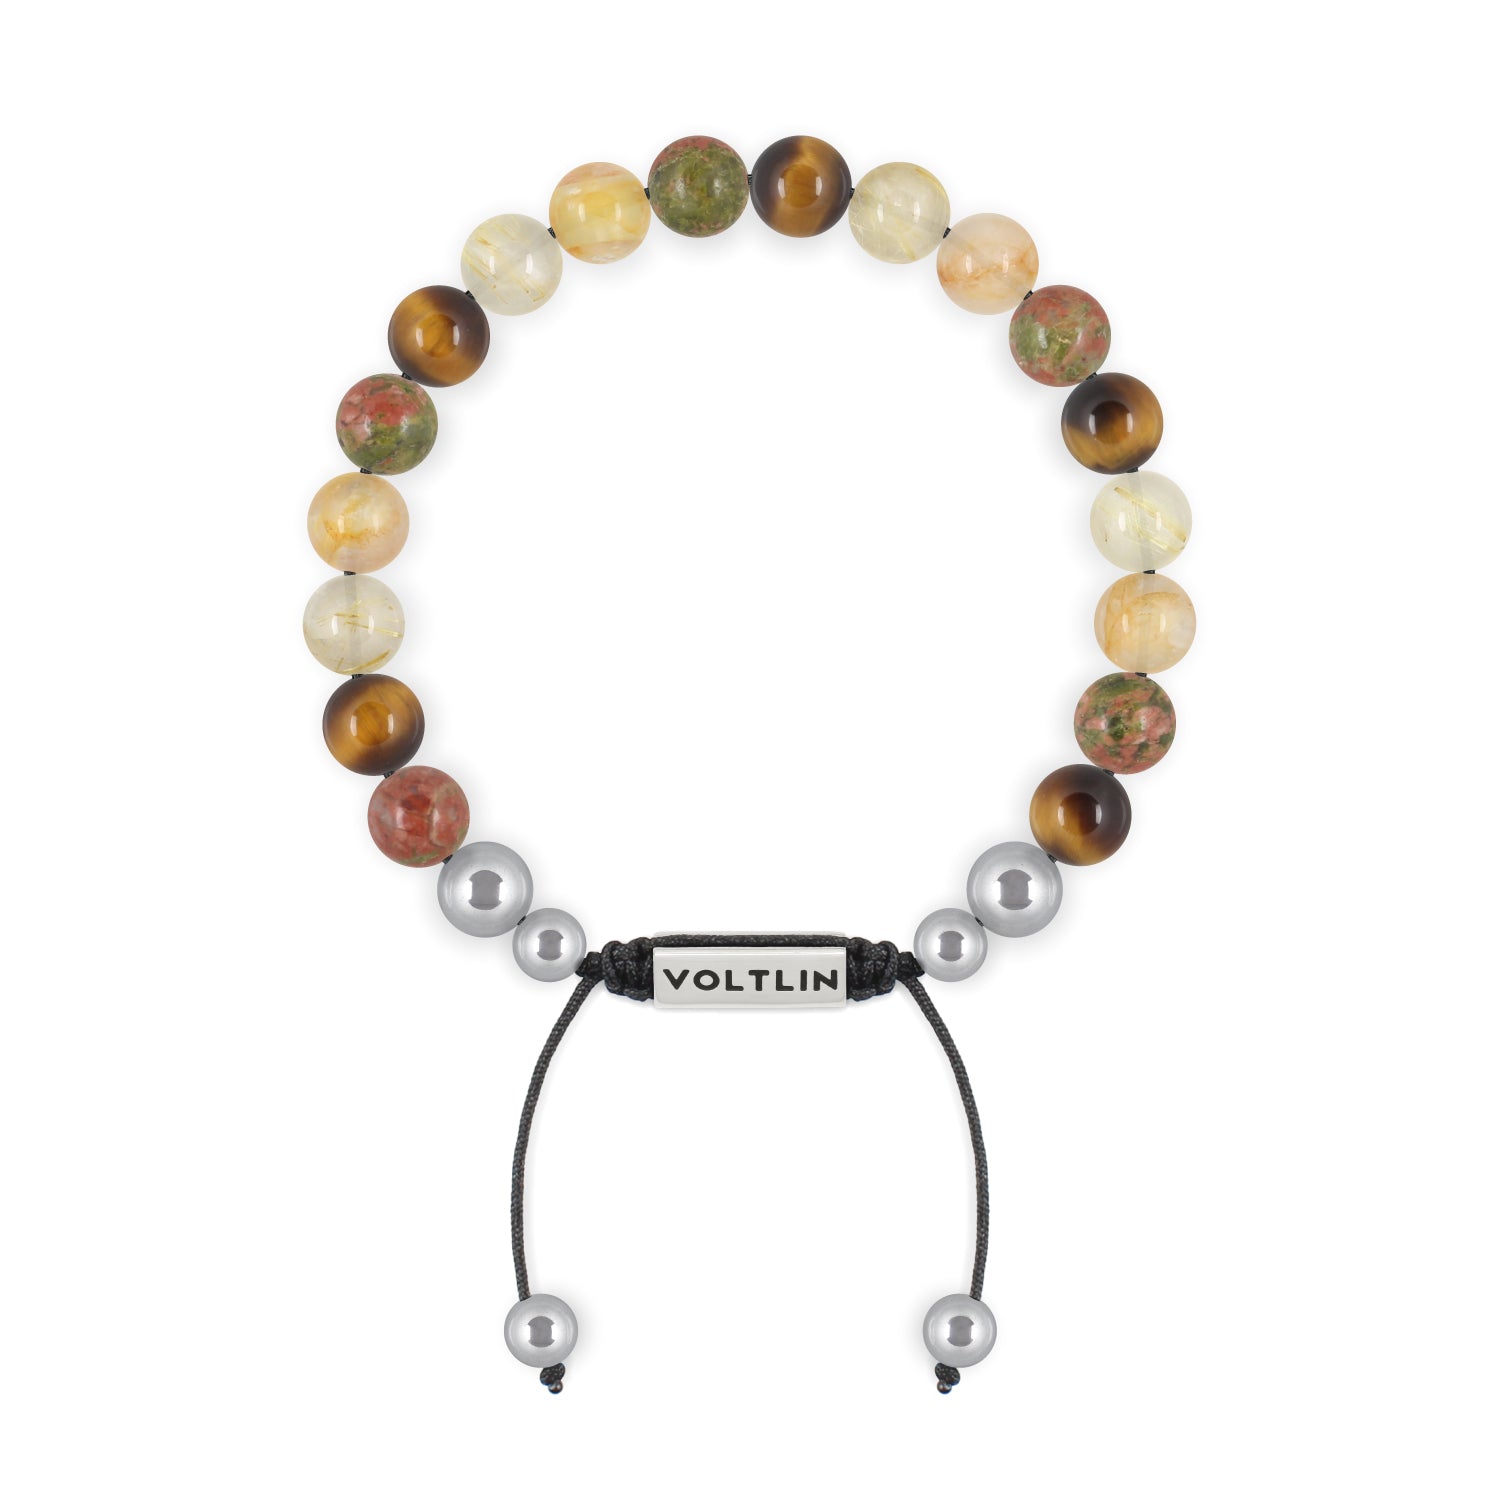 Front view of an 8mm Solar Plexus Chakra beaded shamballa bracelet featuring Unakite, Yellow Tiger's Eye, Rutilated Quartz, & Citrine crystal and silver stainless steel logo bead made by Voltlin